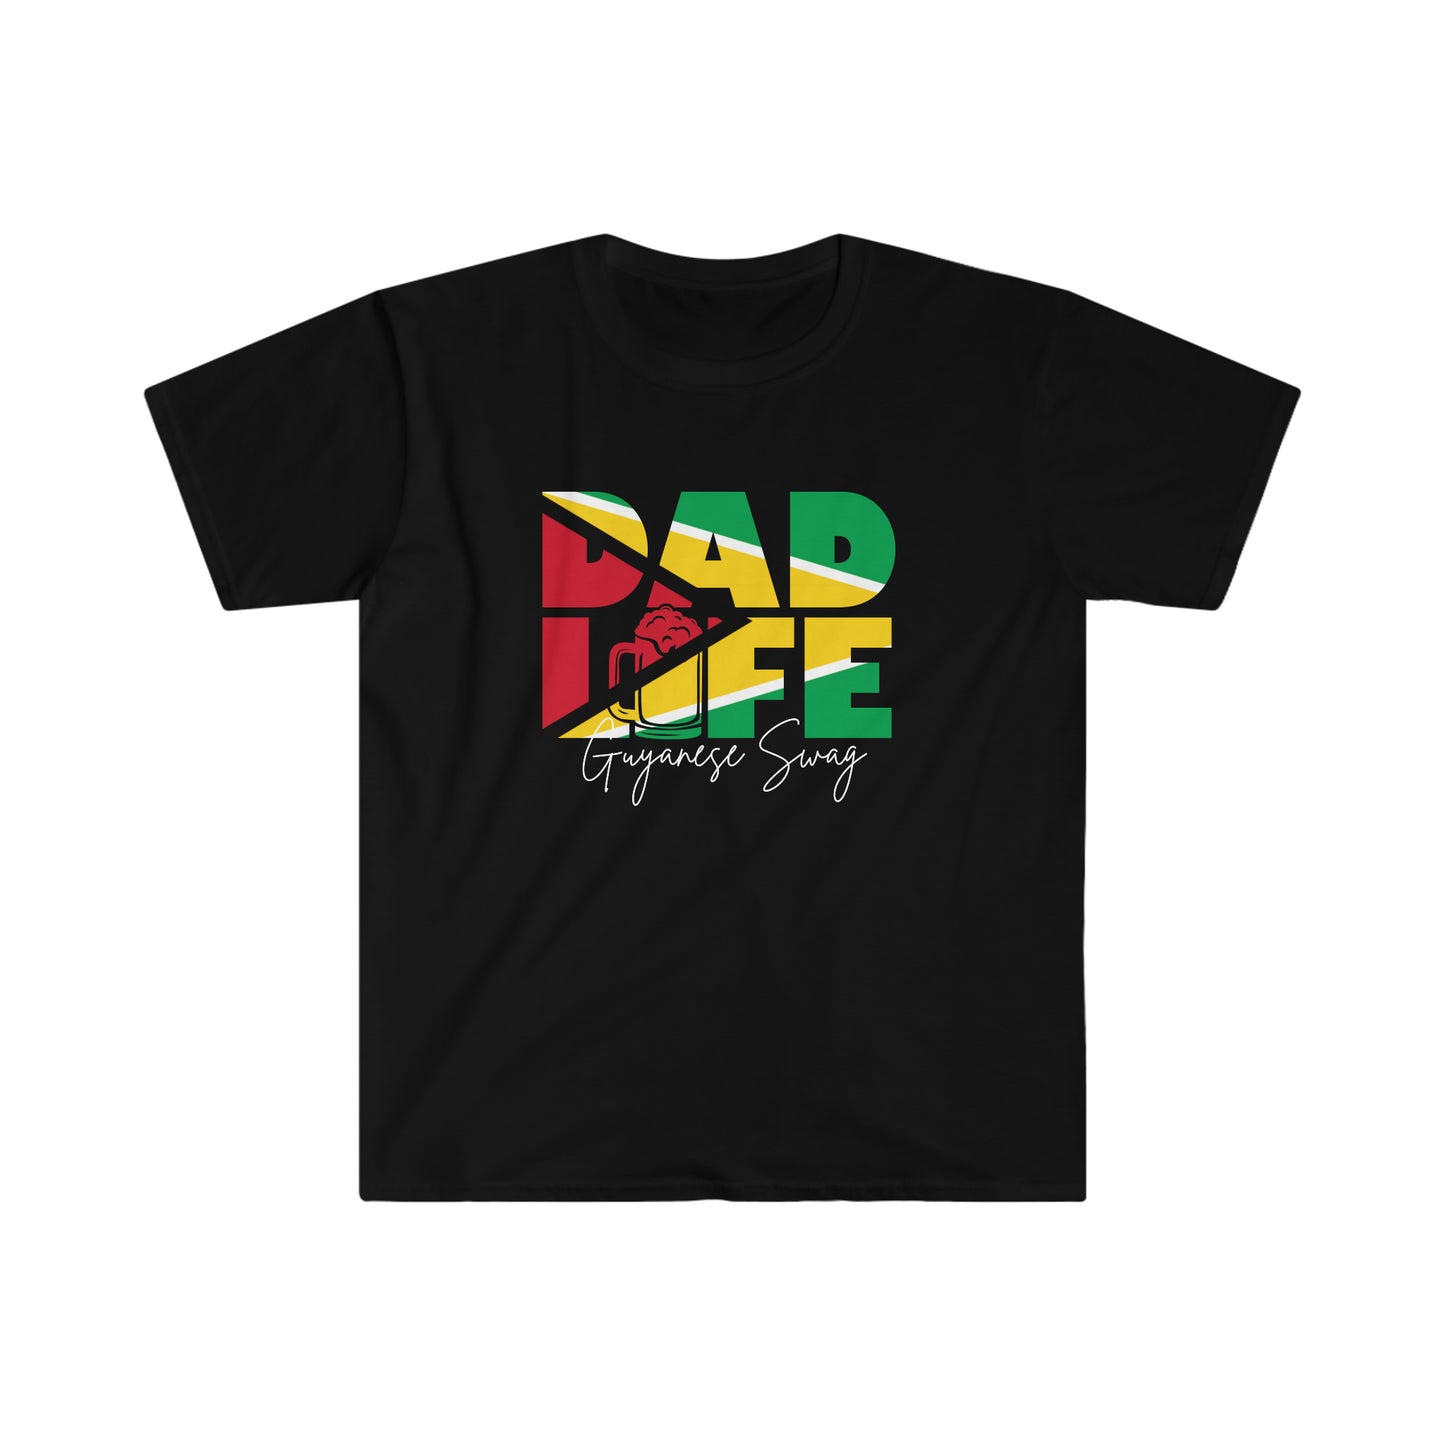 Father's Day Dad Life Men Soft Style Shirt Sleeve T-Shirt by Guyanese Swag.